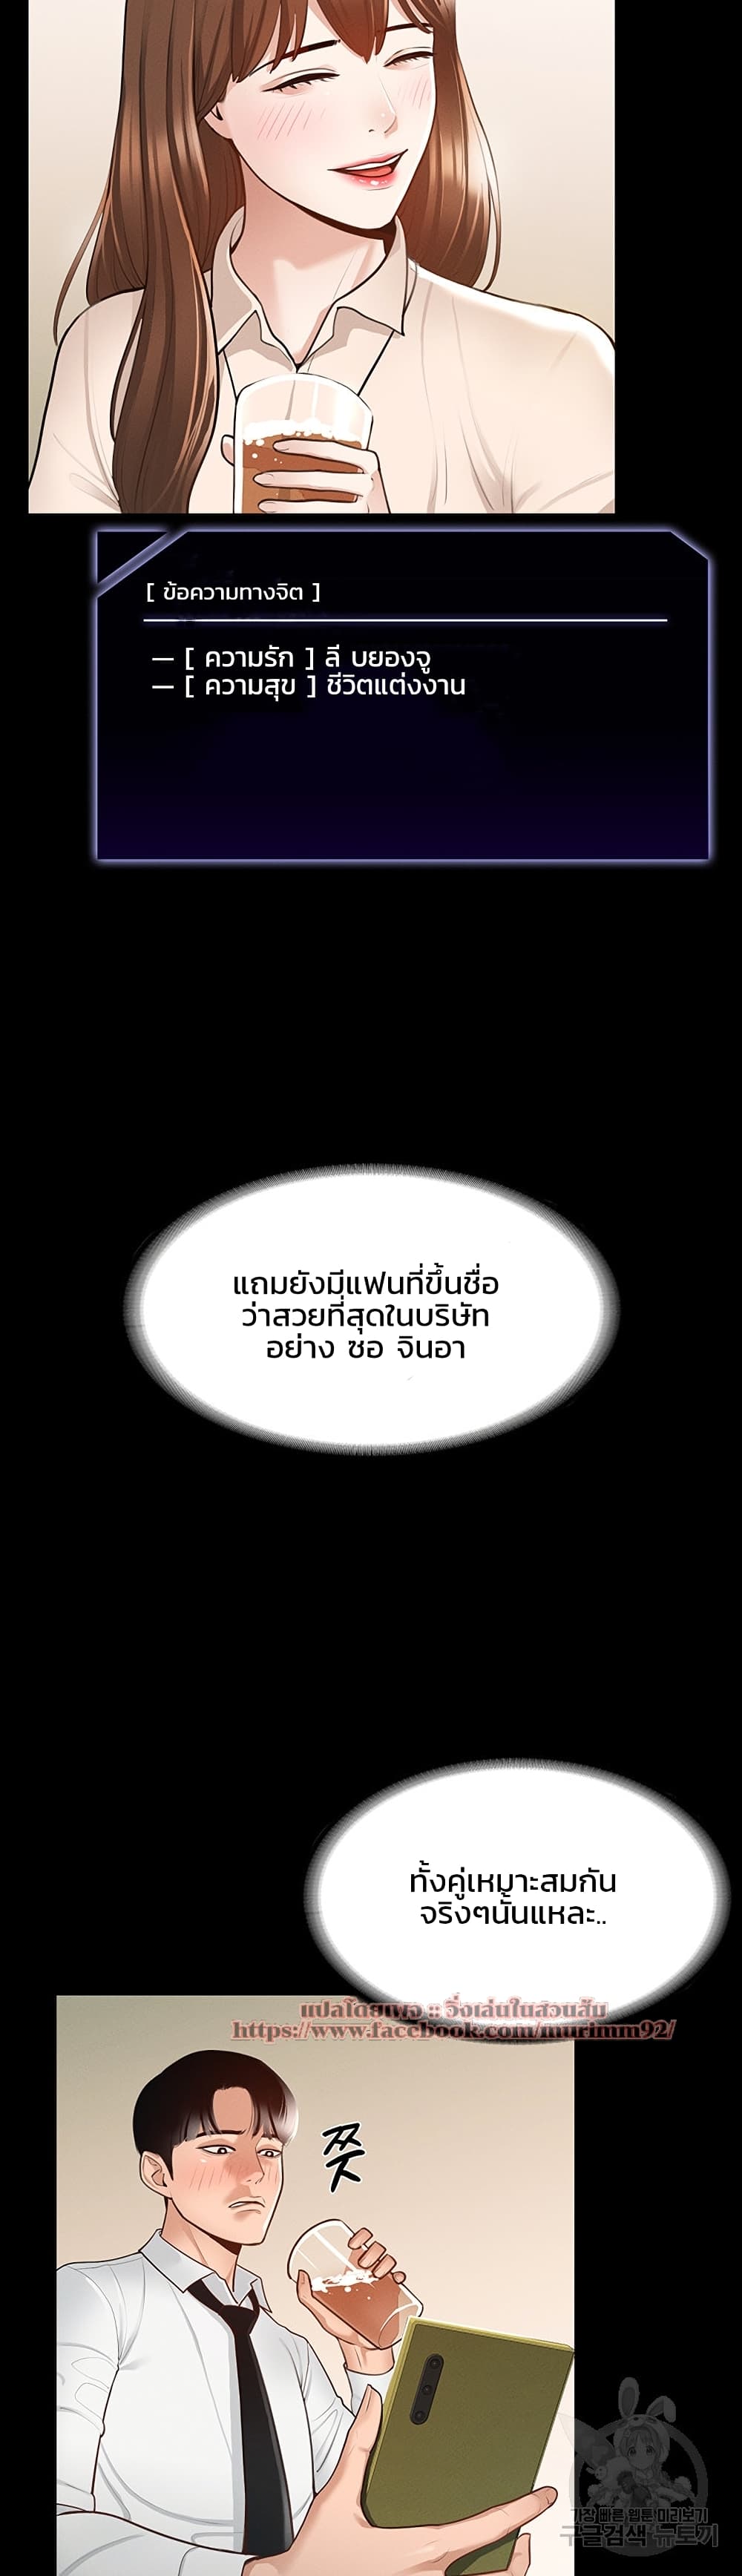 Workplace Manager Privileges ตอนที่ 2 ภาพ 7